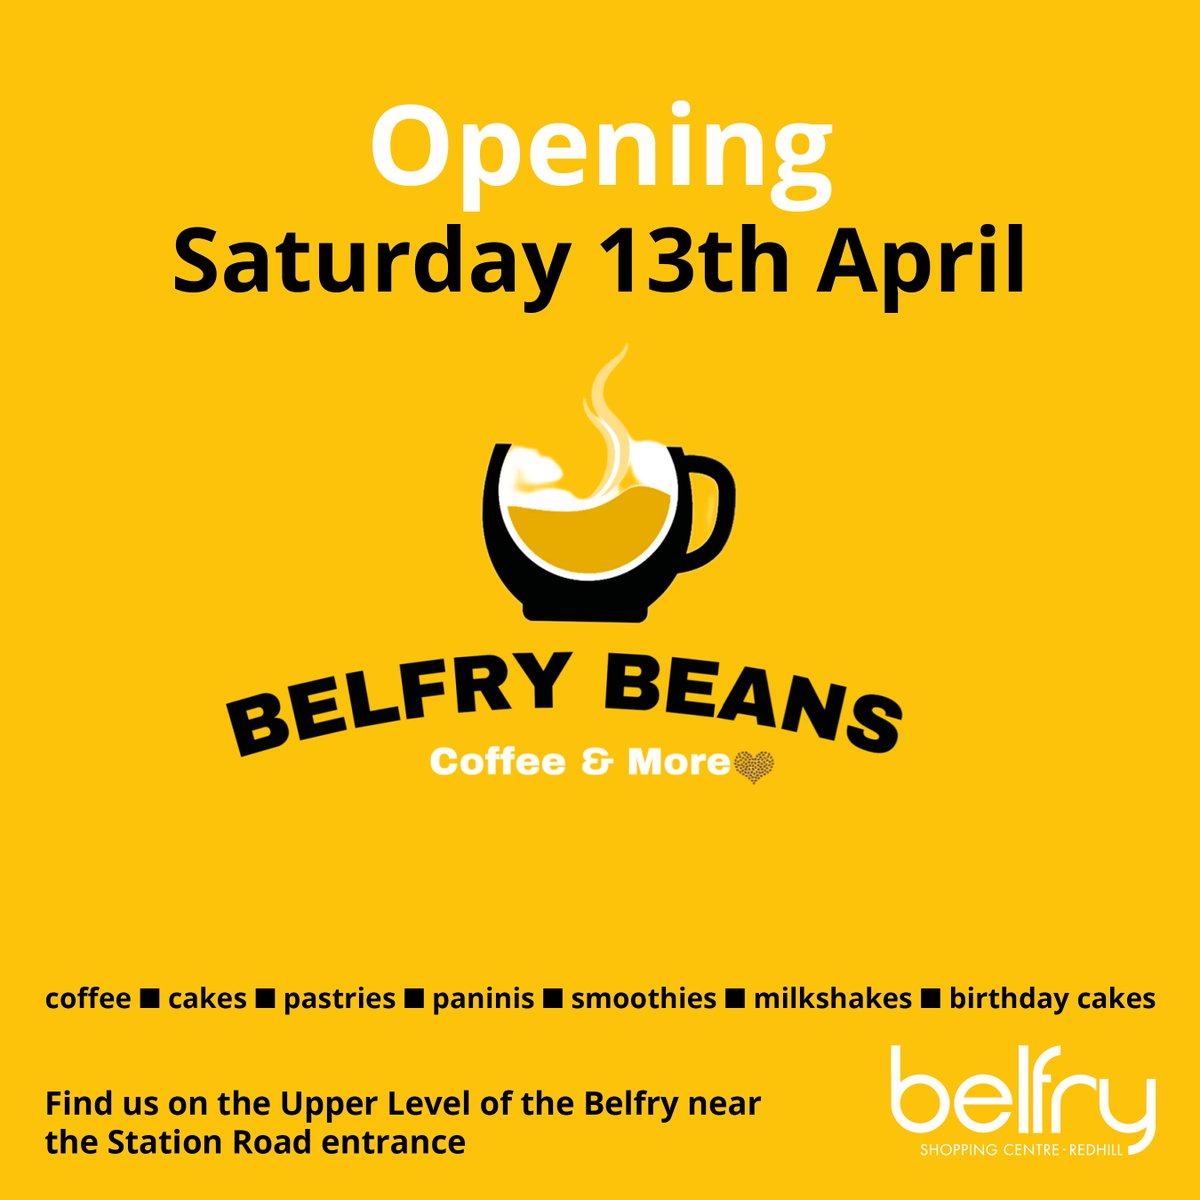 ☕️ Belfry Beans, a new independent coffee shop, opens in the Belfry tomorrow. Situated on the Upper Level near Station Road they will be selling cakes, pastries, paninis, smoothies, milkshakes & birthday cakes to order. Welcome to Redhill! #Redhill #BelfryBeans #BelfryRedhill